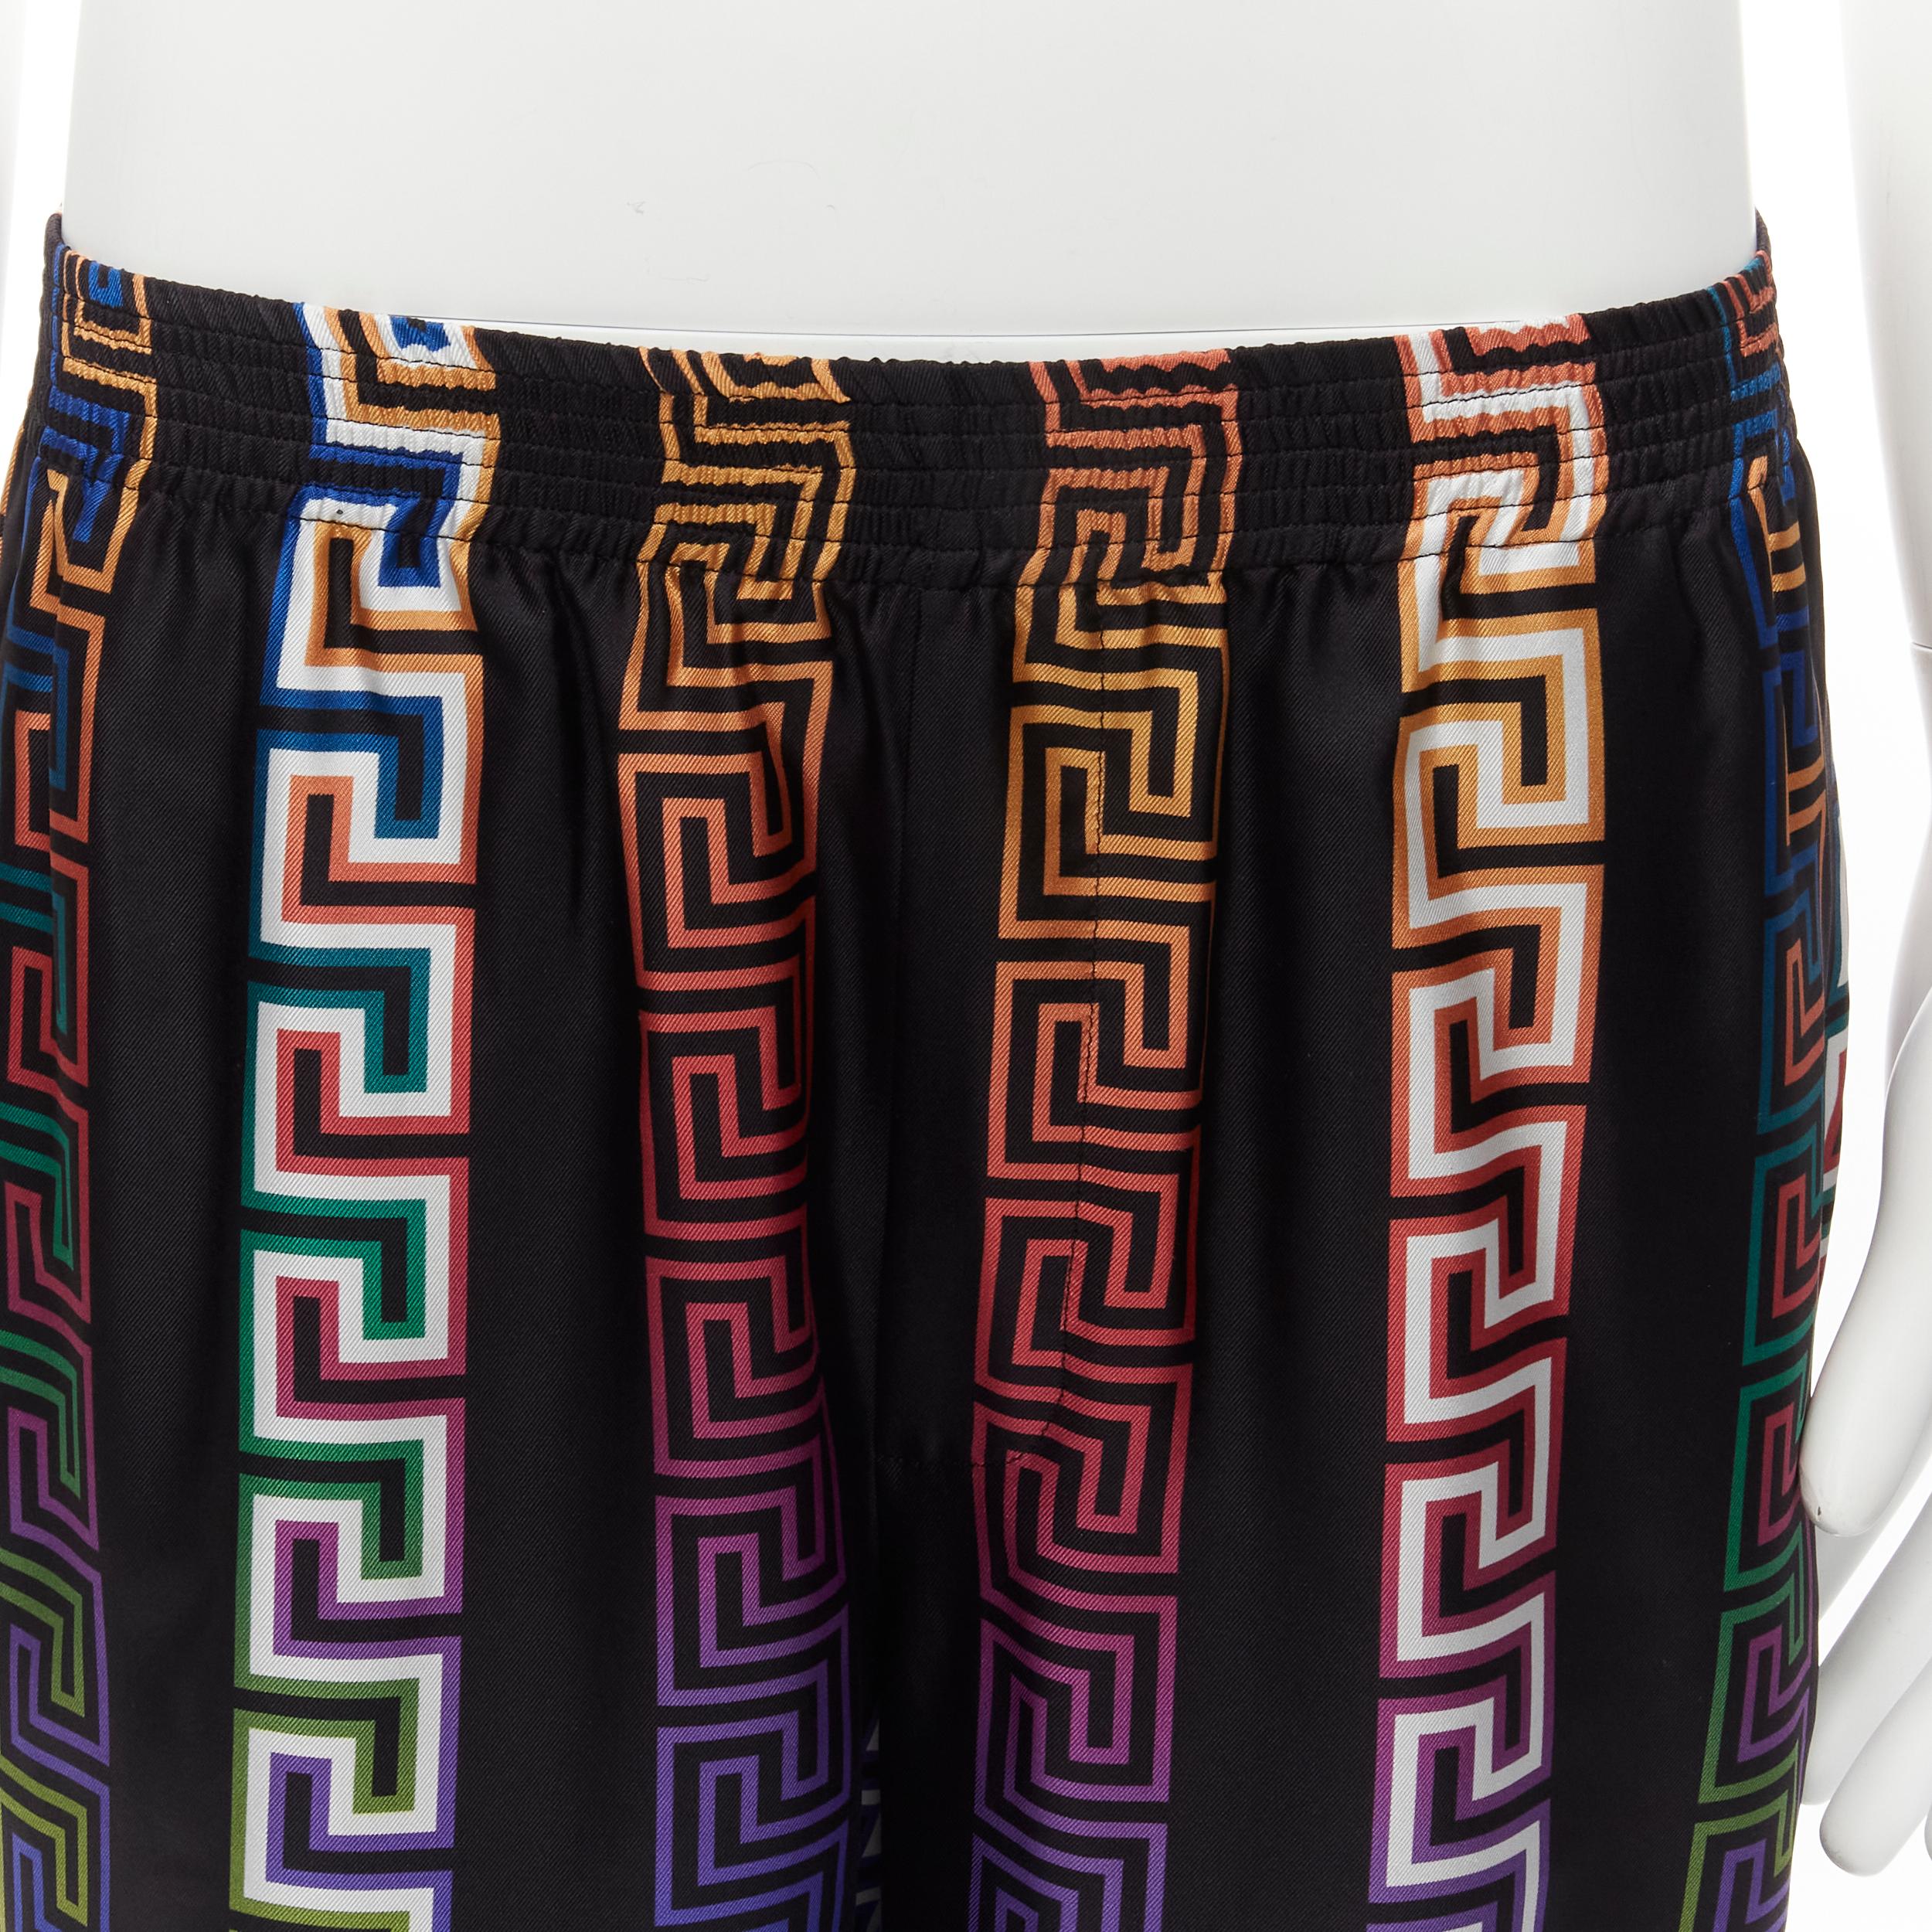 new VERSACE 2021 Runway Neon Greca black college fit silk twill shorts IT50 L

Reference: TGAS/C01768

Brand: Versace

Designer: Donatella Versace

Model: A86243 1A00967 5B020

Collection: 2021 - Runway

Material: Silk

Color: Multicolour

Pattern: